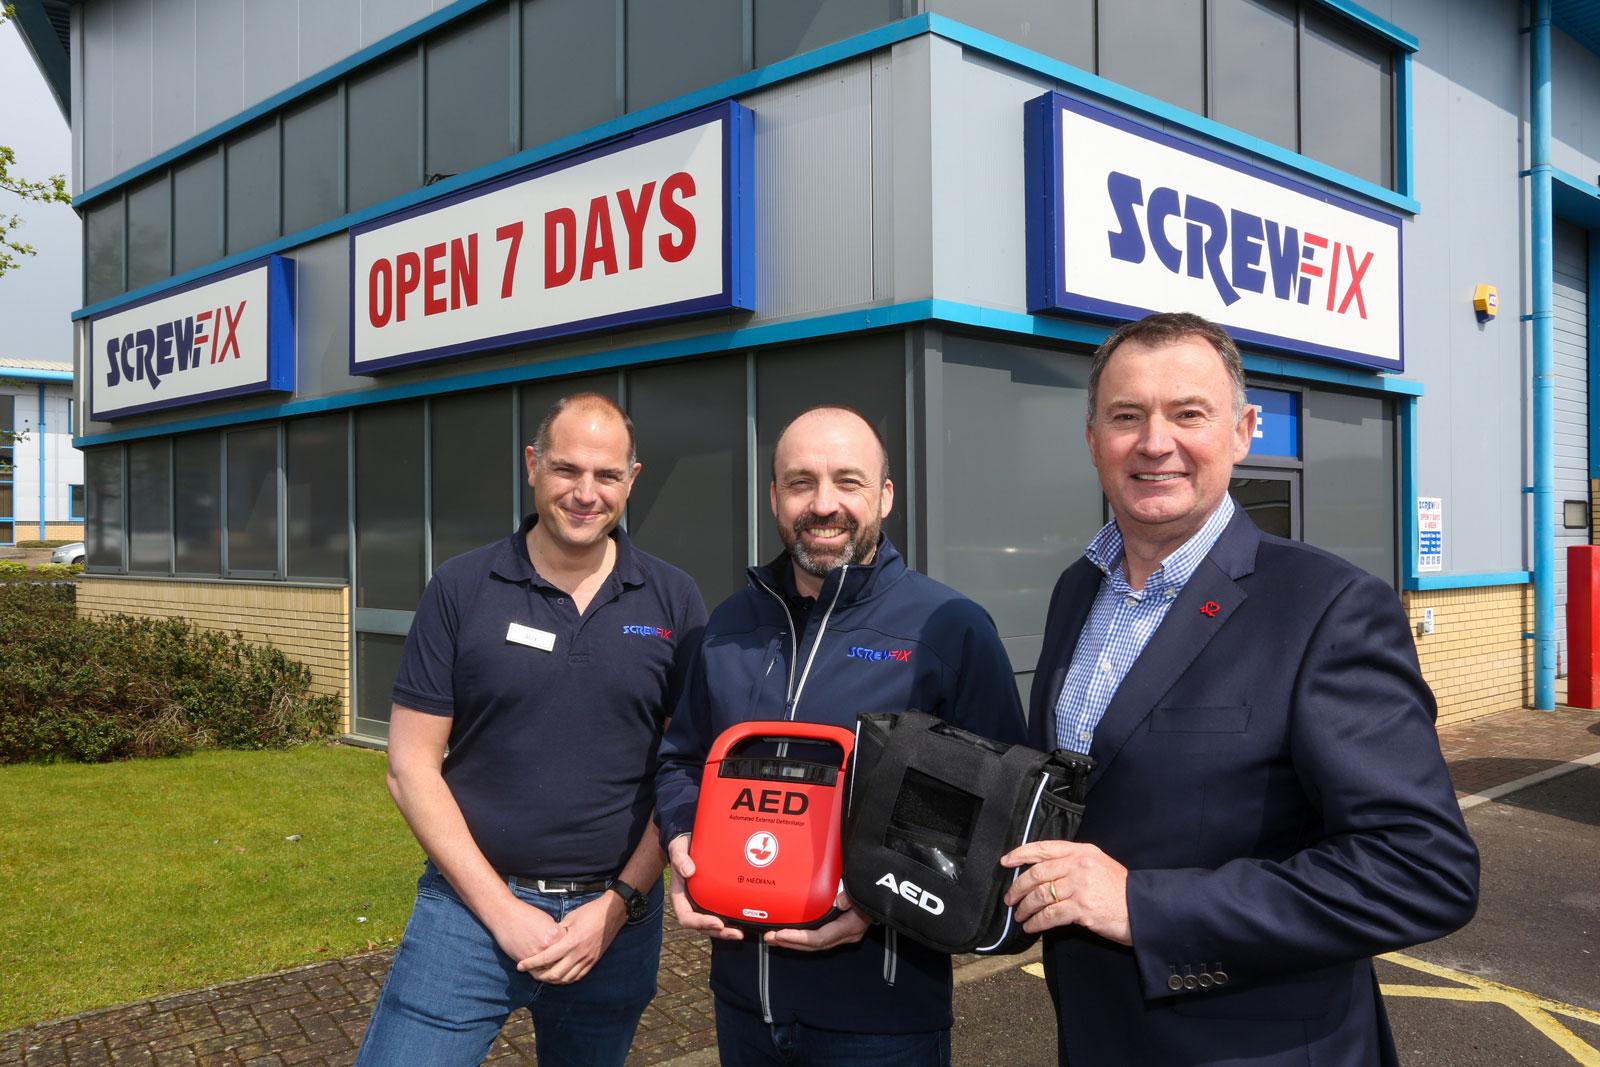 Scott Parsons from Screwfix with Mike Taylor from BHF